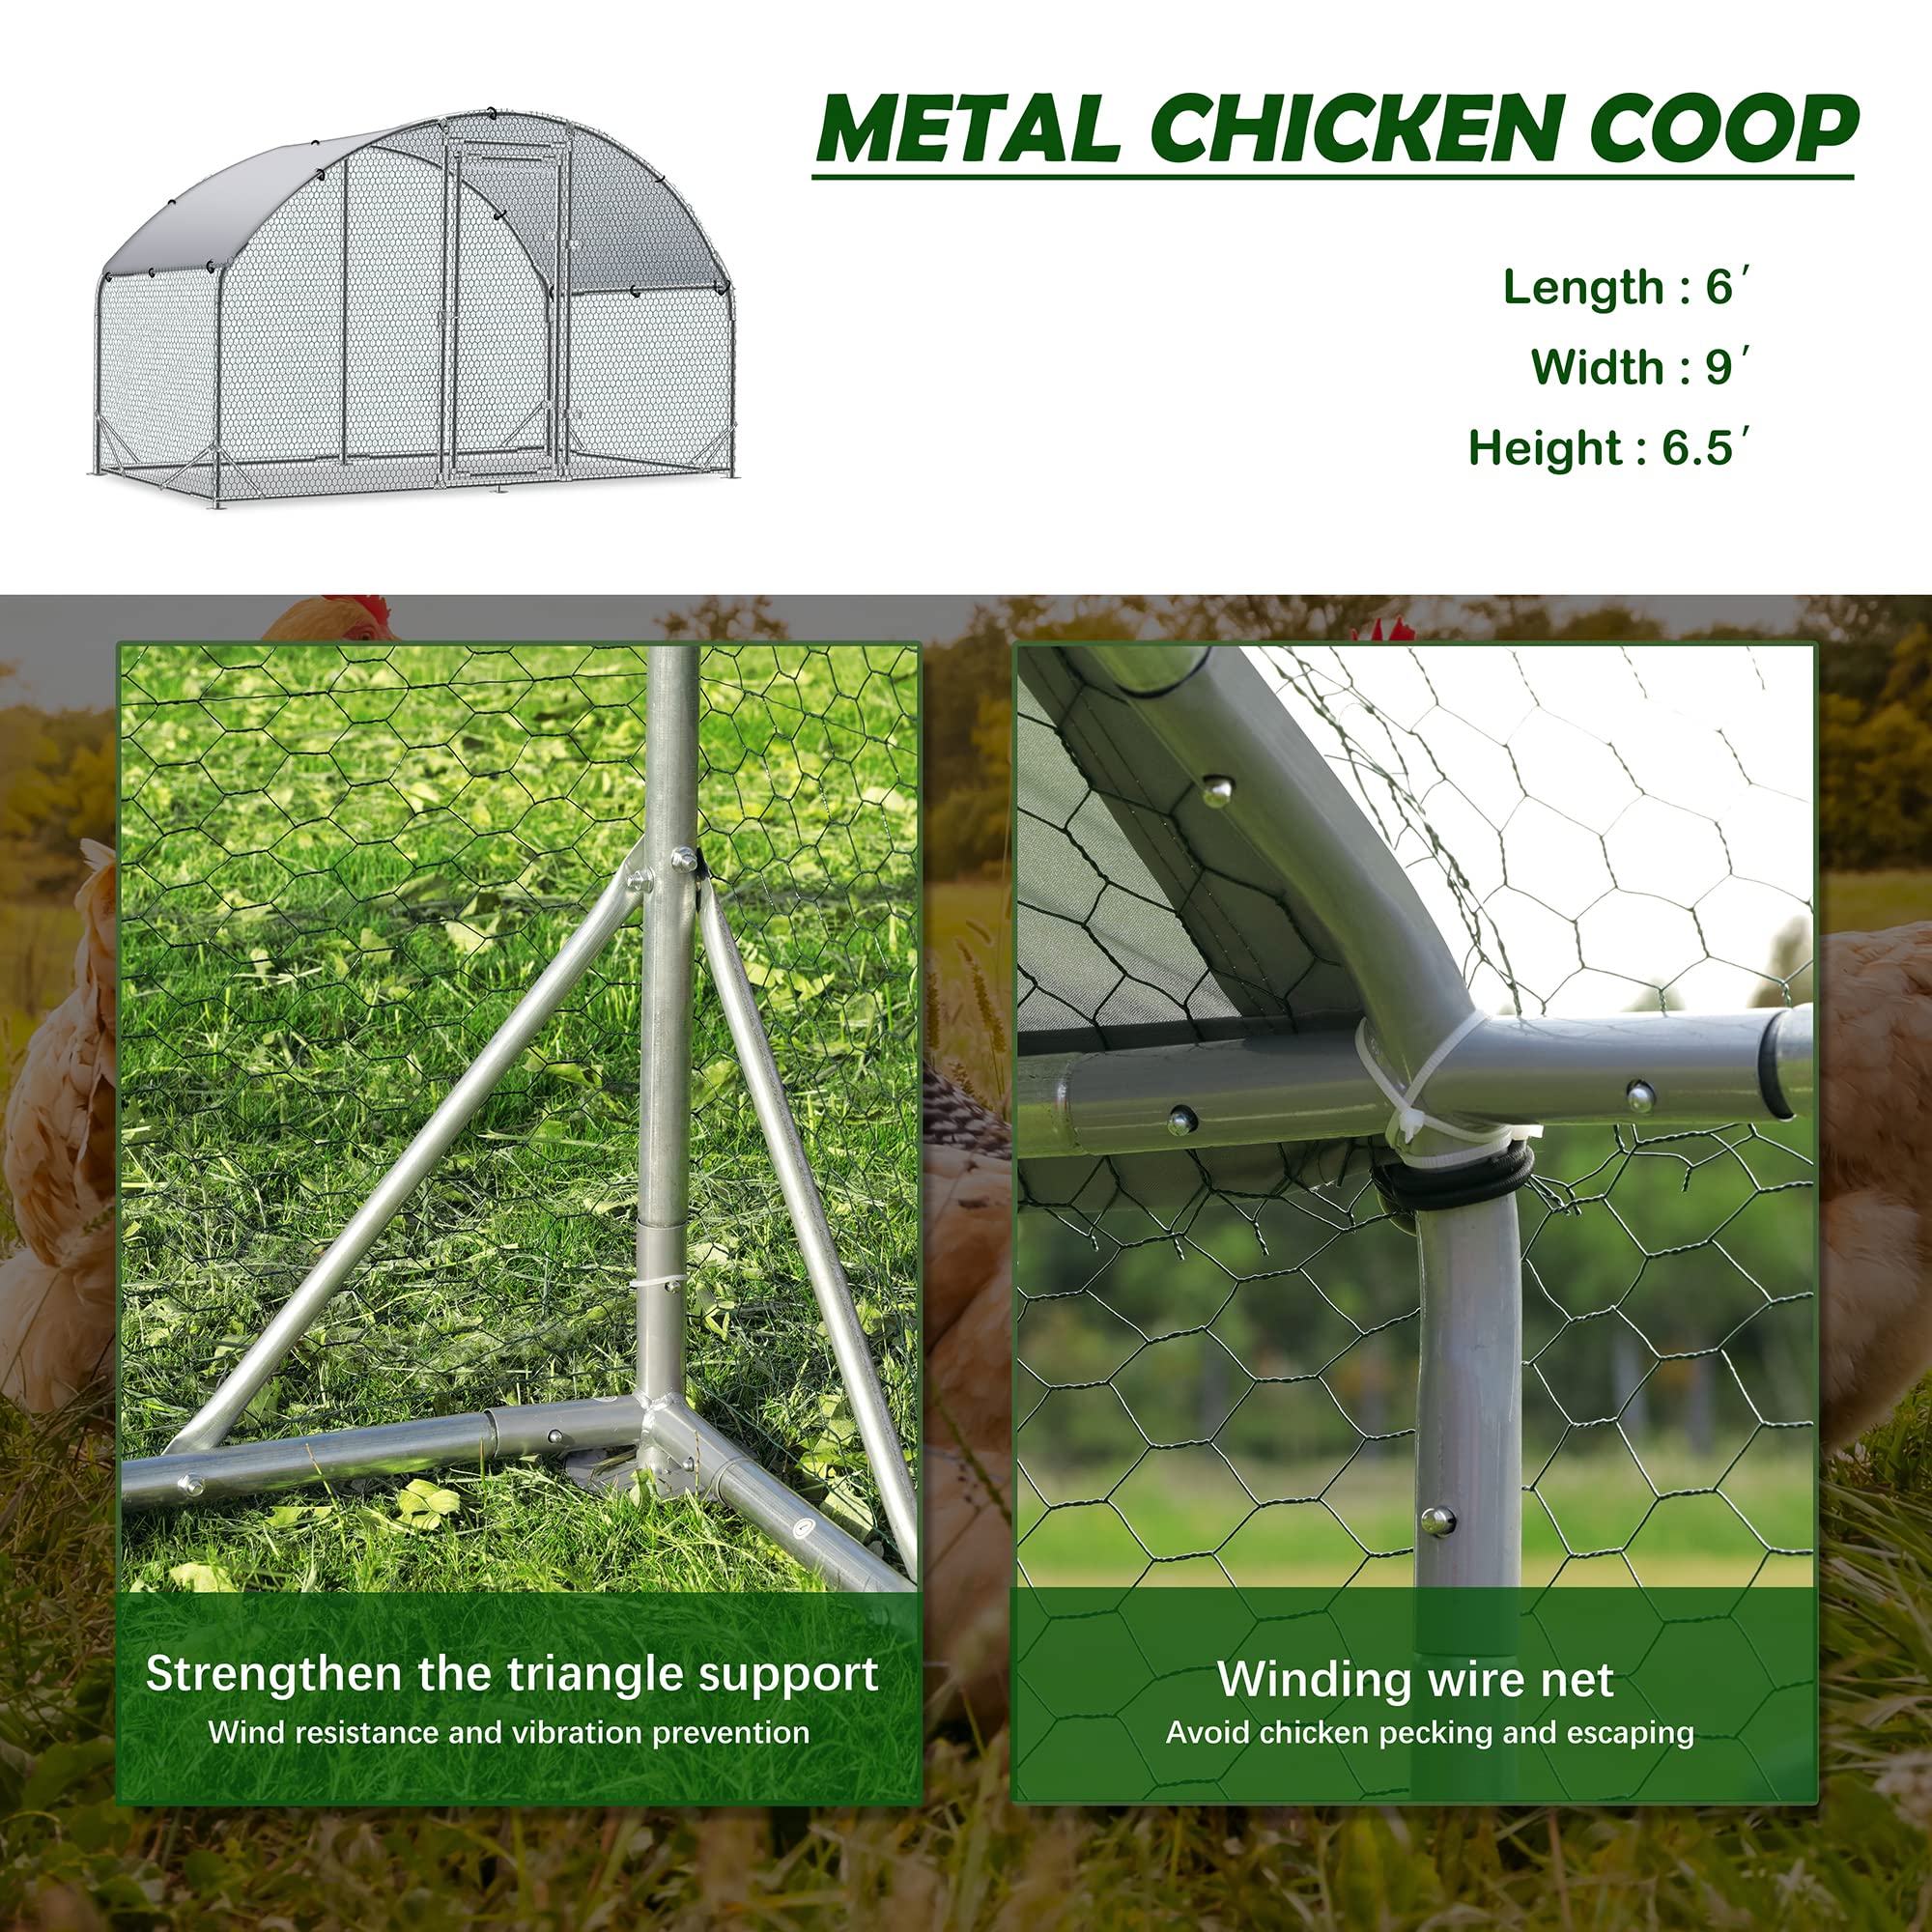 TOLEAD Large Metal Chicken Coop Upgrade Tri-Supporting Wire Mesh Chicken Run,Chicken Pen with Water-Resident and Anti-UV Cover,Duck Rabbit House Outdoor(9’ W x 6.6’ L x 6.5’ H)